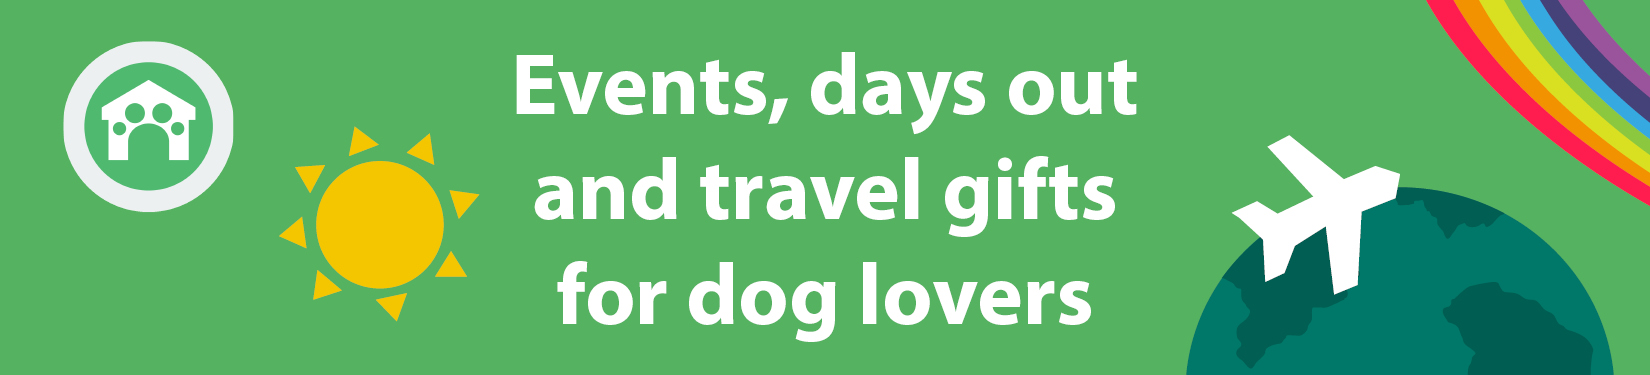 Events, days out and travel gifts for dog lovers header image